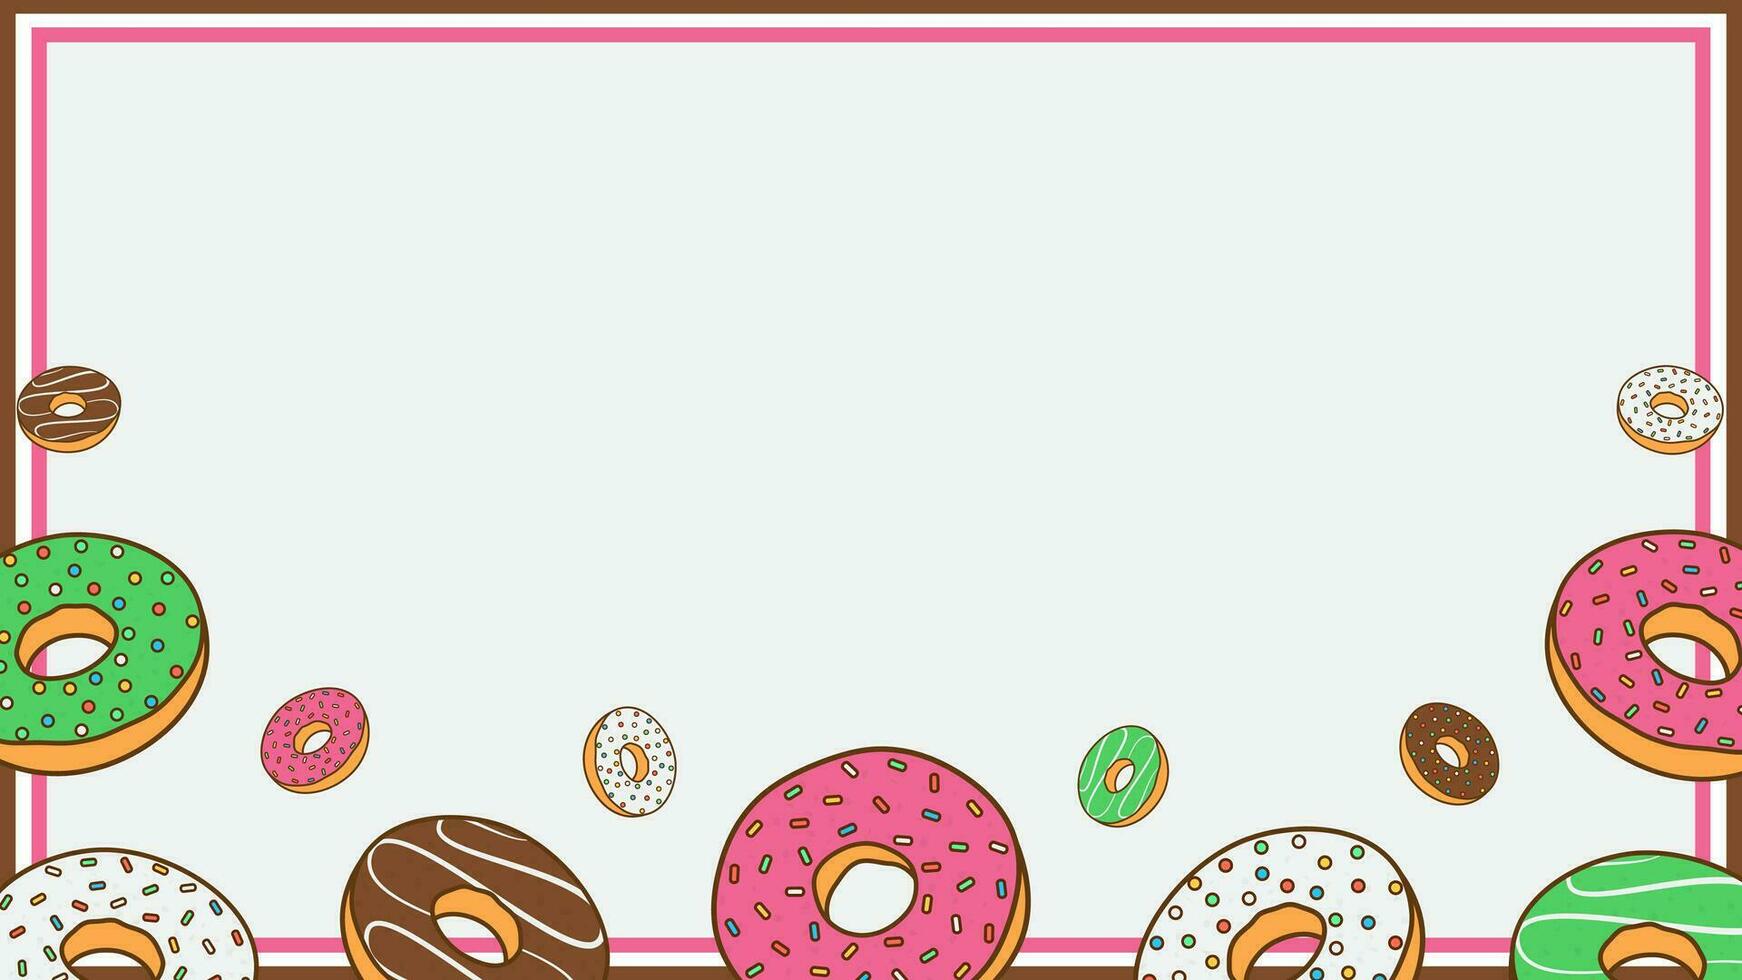 Donuts Background Design Template. Donuts Cartoon Vector Illustration. Food